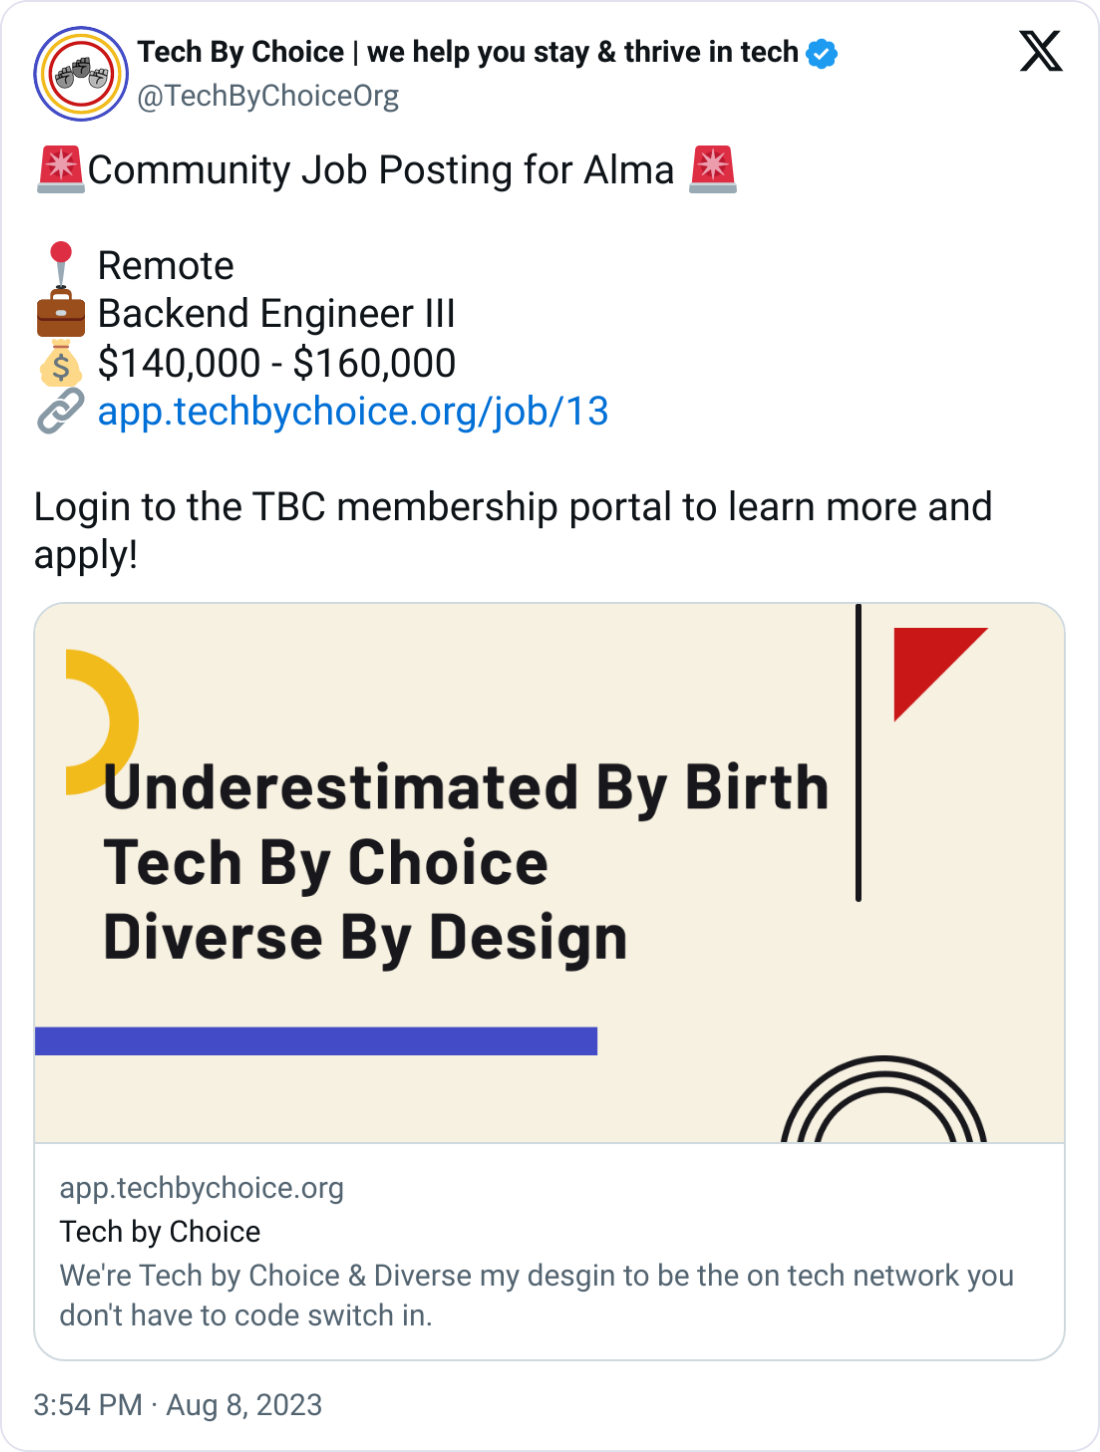 Tech By Choice | we help you stay & thrive in tech @TechByChoiceOrg 🚨Community Job Posting for Alma 🚨  📍 Remote 💼 Backend Engineer III 💰 $140,000 - $160,000 🔗 https://app.techbychoice.org/job/13  Login to the TBC membership portal to learn more and apply!